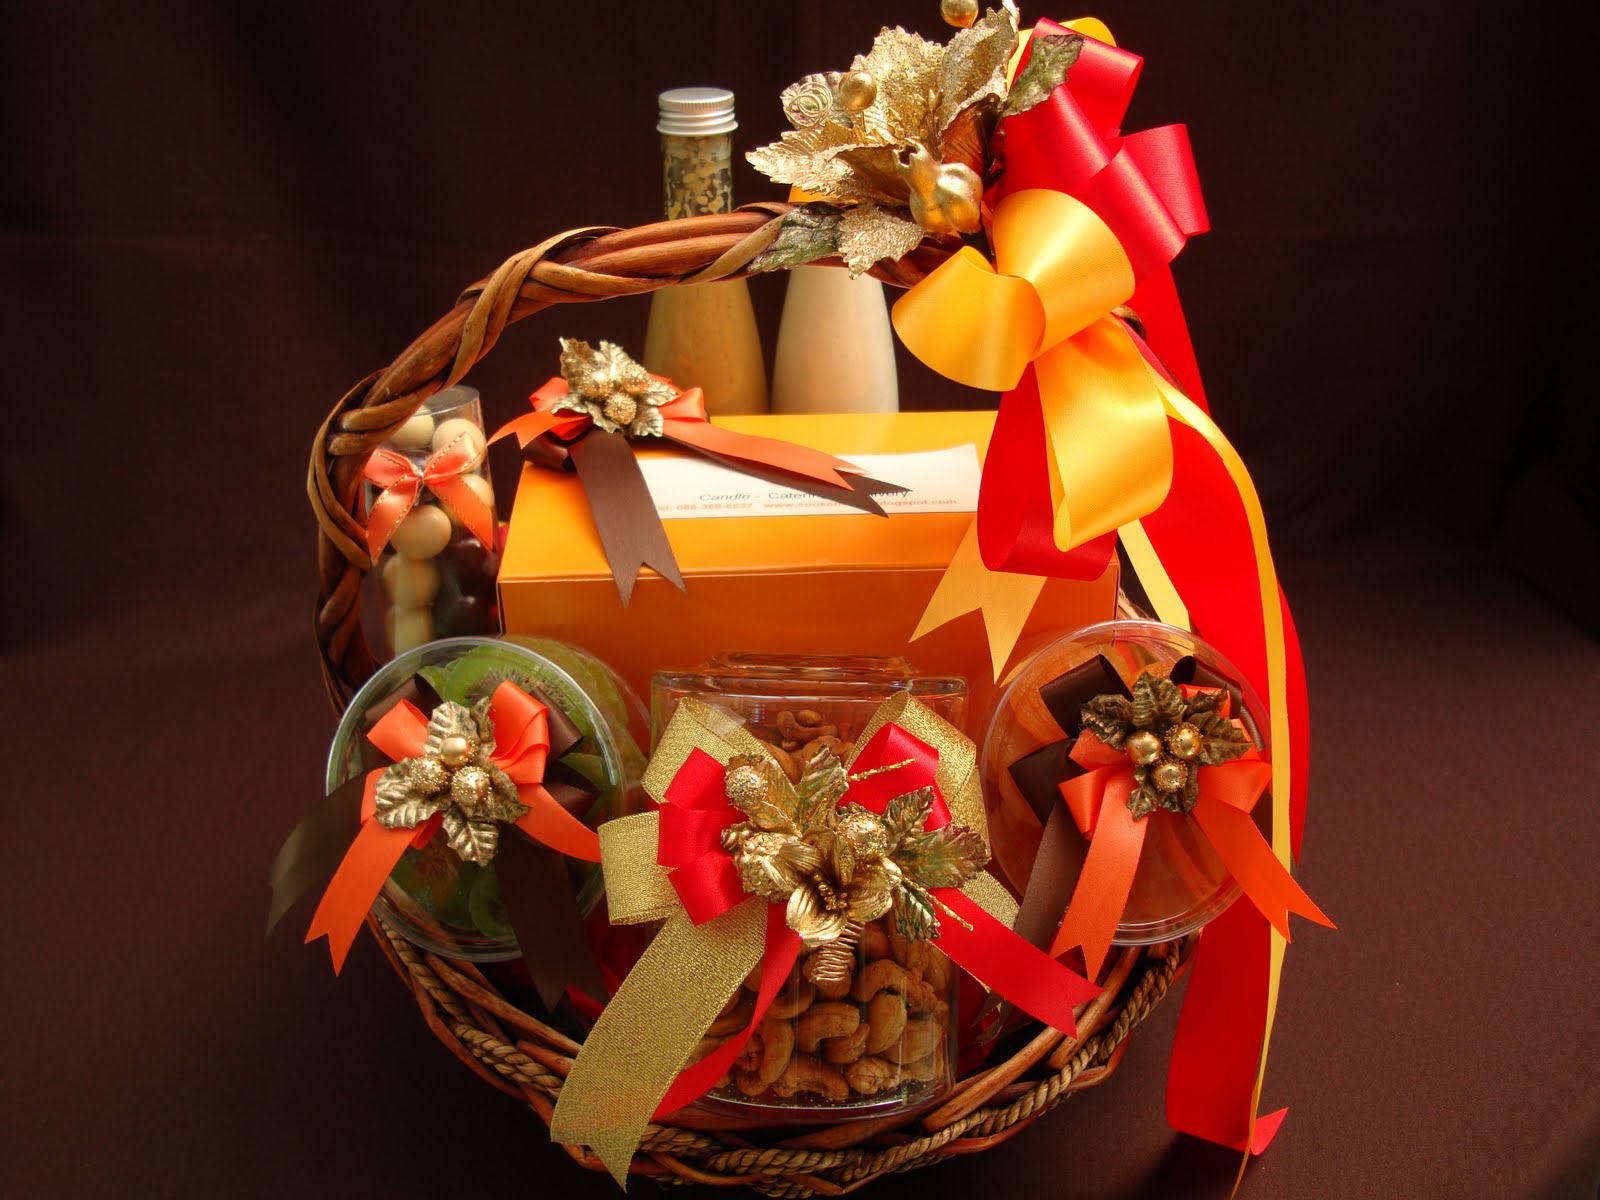 CANDLE Gourmet New Year Gift Baskets 2010